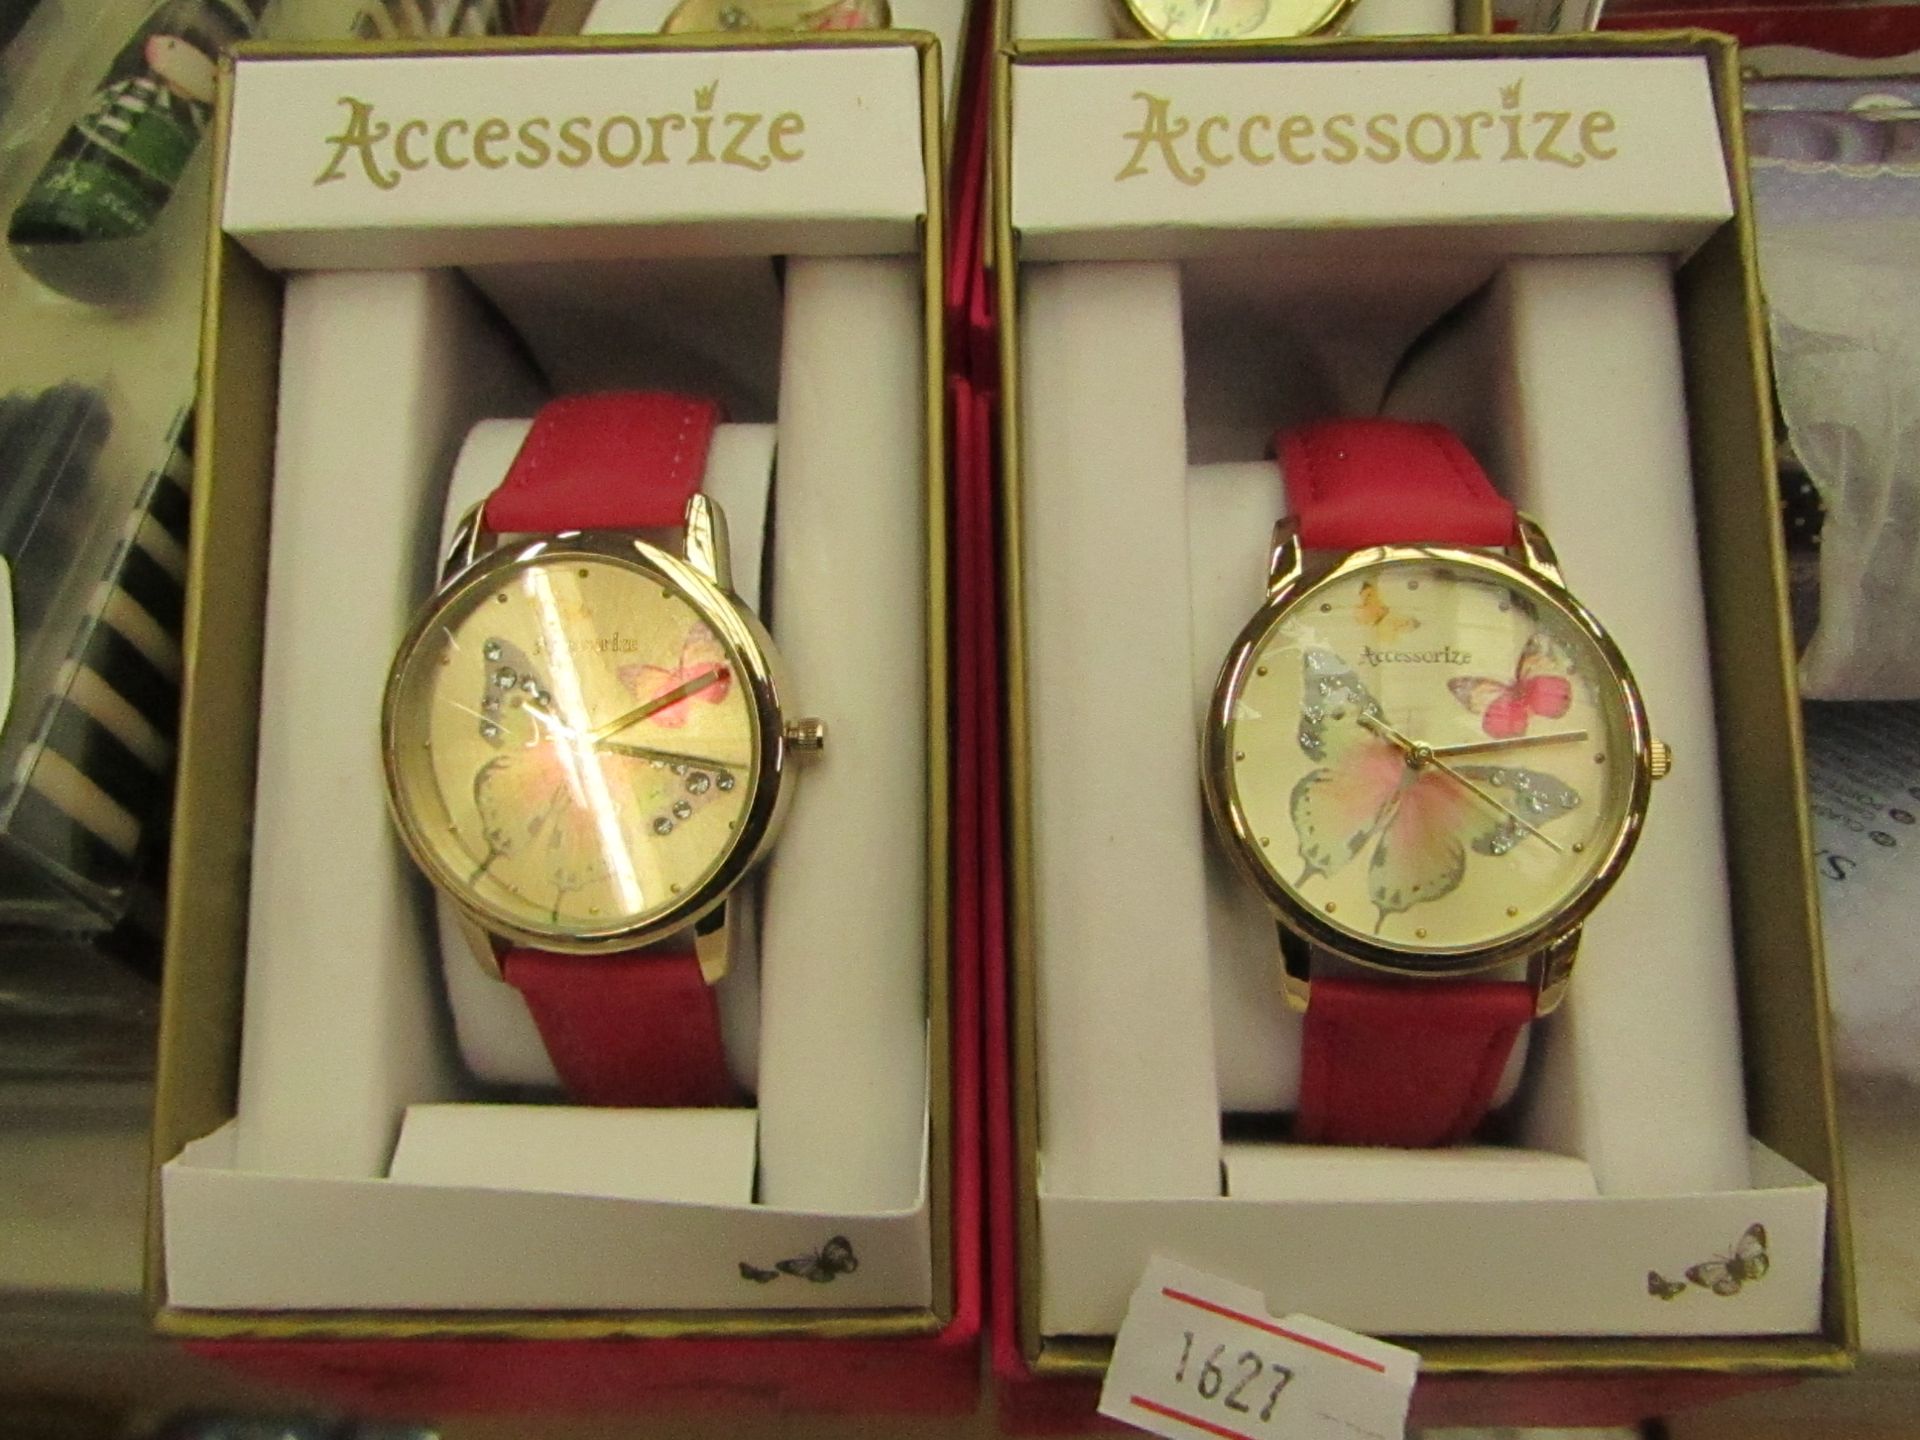 2 x Accessorize Butterfly Watches new & packaged (all ticking)